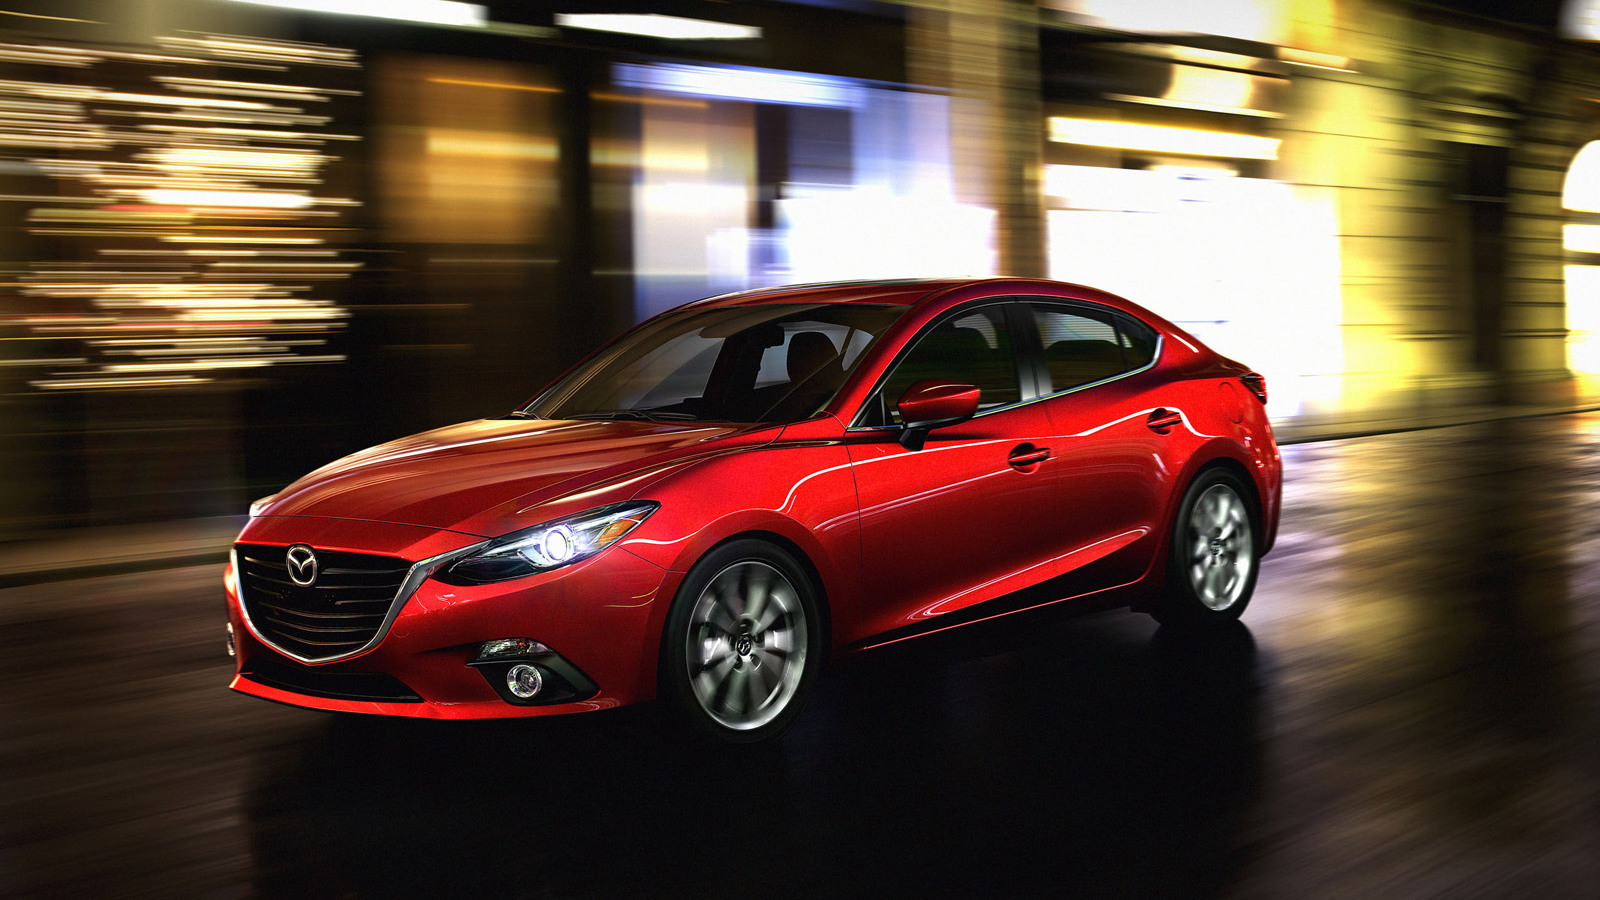 2014 Mazda 3 Sedan: Official Details, Photos And Video